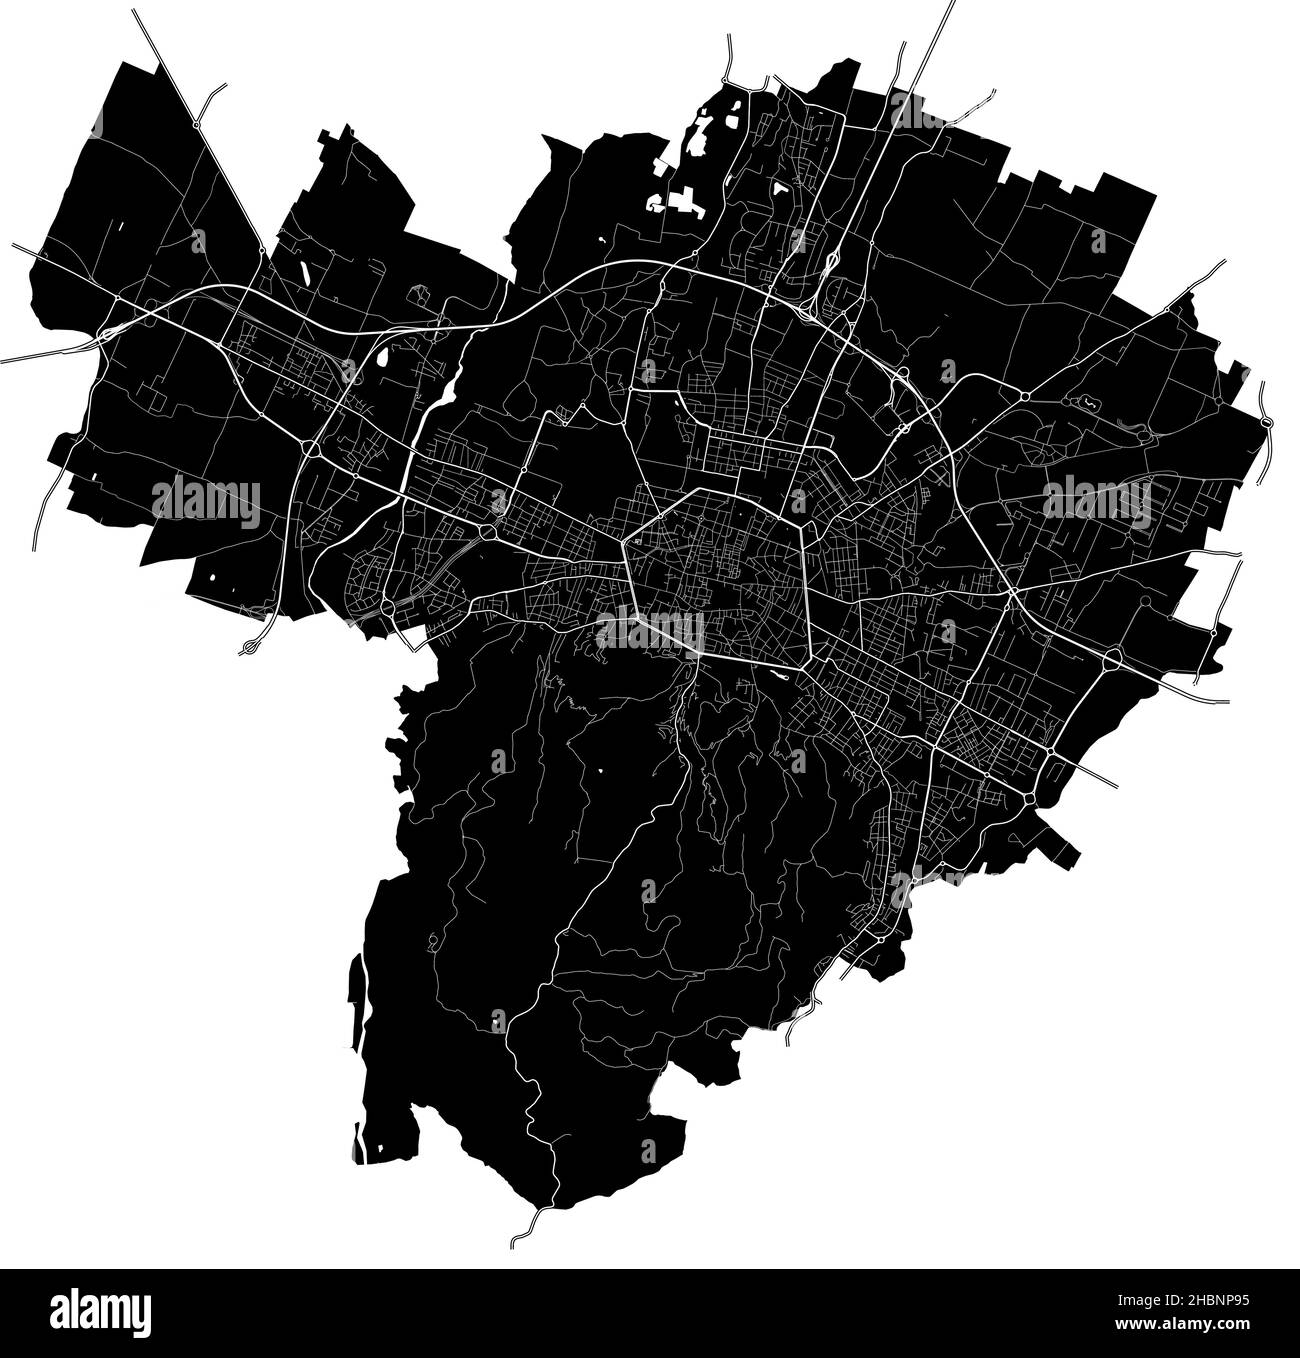 Bologna, Italy, high resolution vector map with city boundaries, and editable paths. The city map was drawn with white areas and lines for main roads, Stock Vector